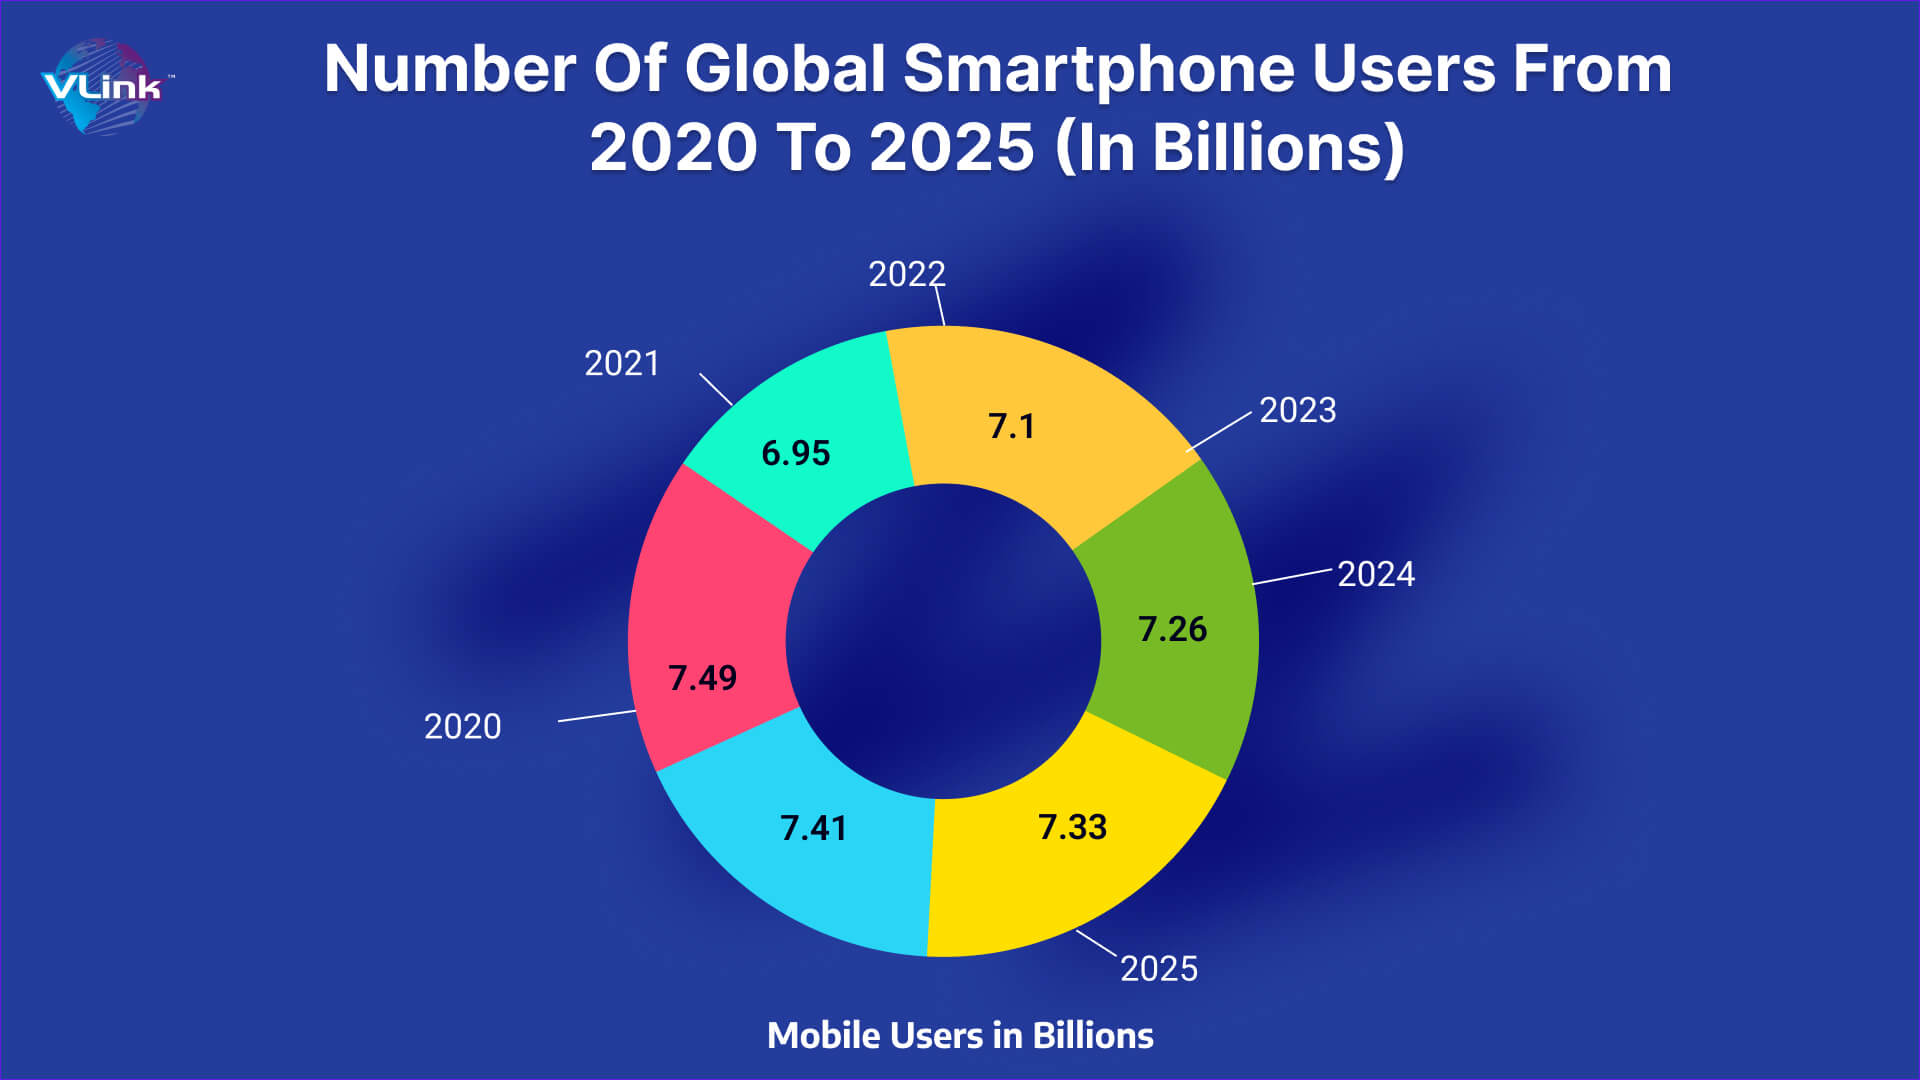 Number of Global Smartphone Users From 2020 to 2025